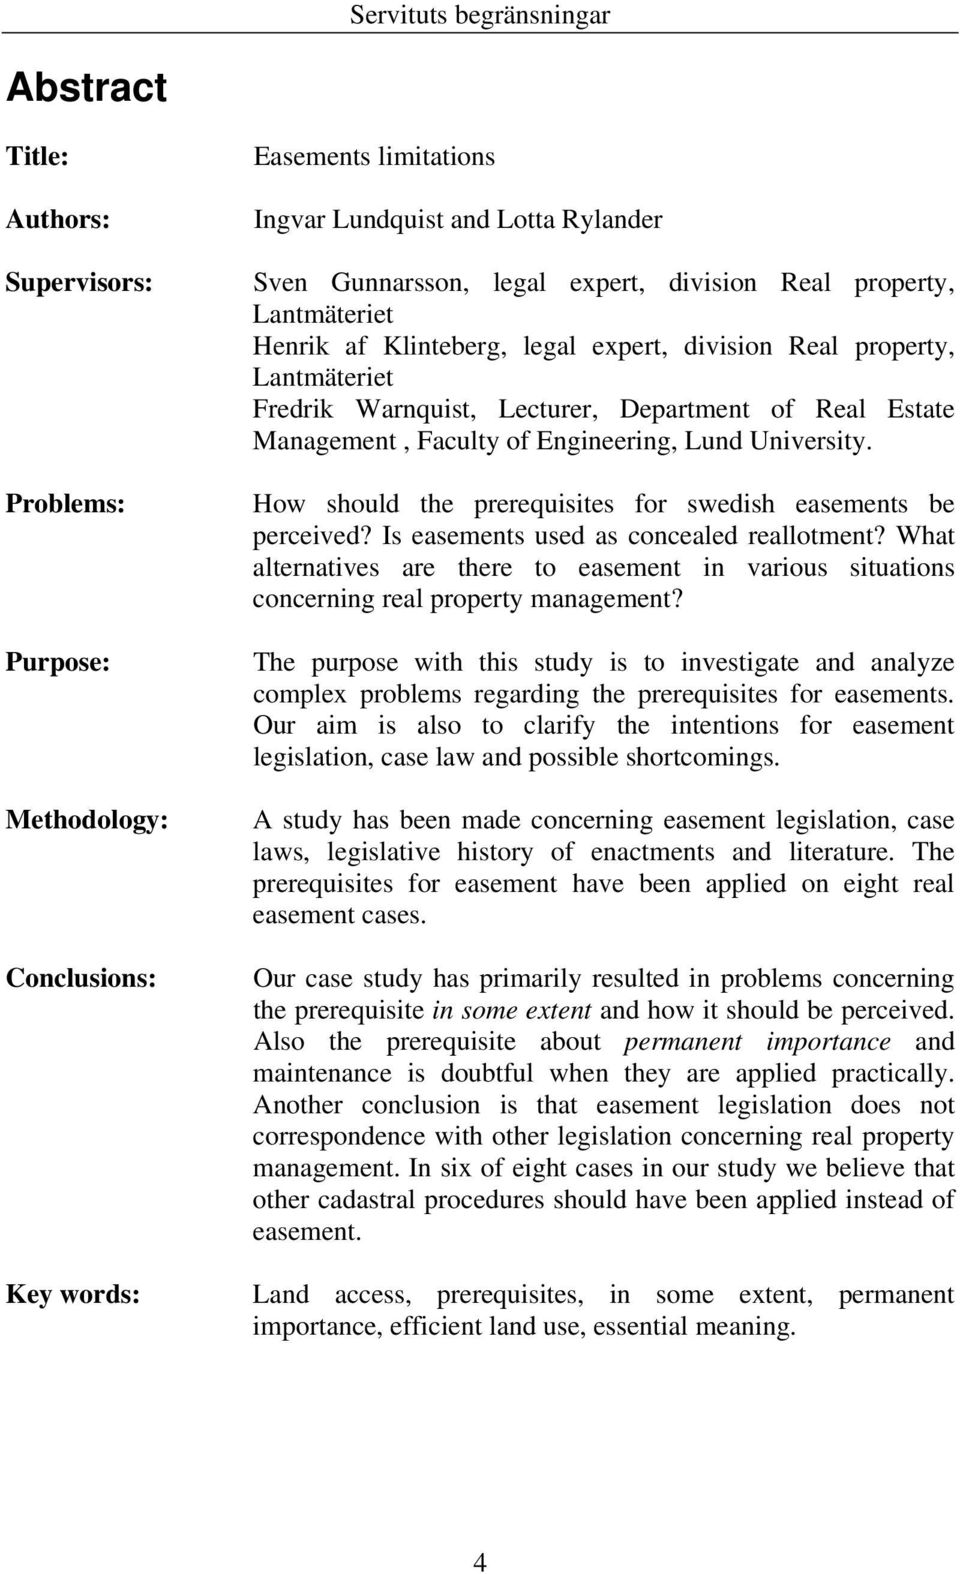 University. How should the prerequisites for swedish easements be perceived? Is easements used as concealed reallotment?